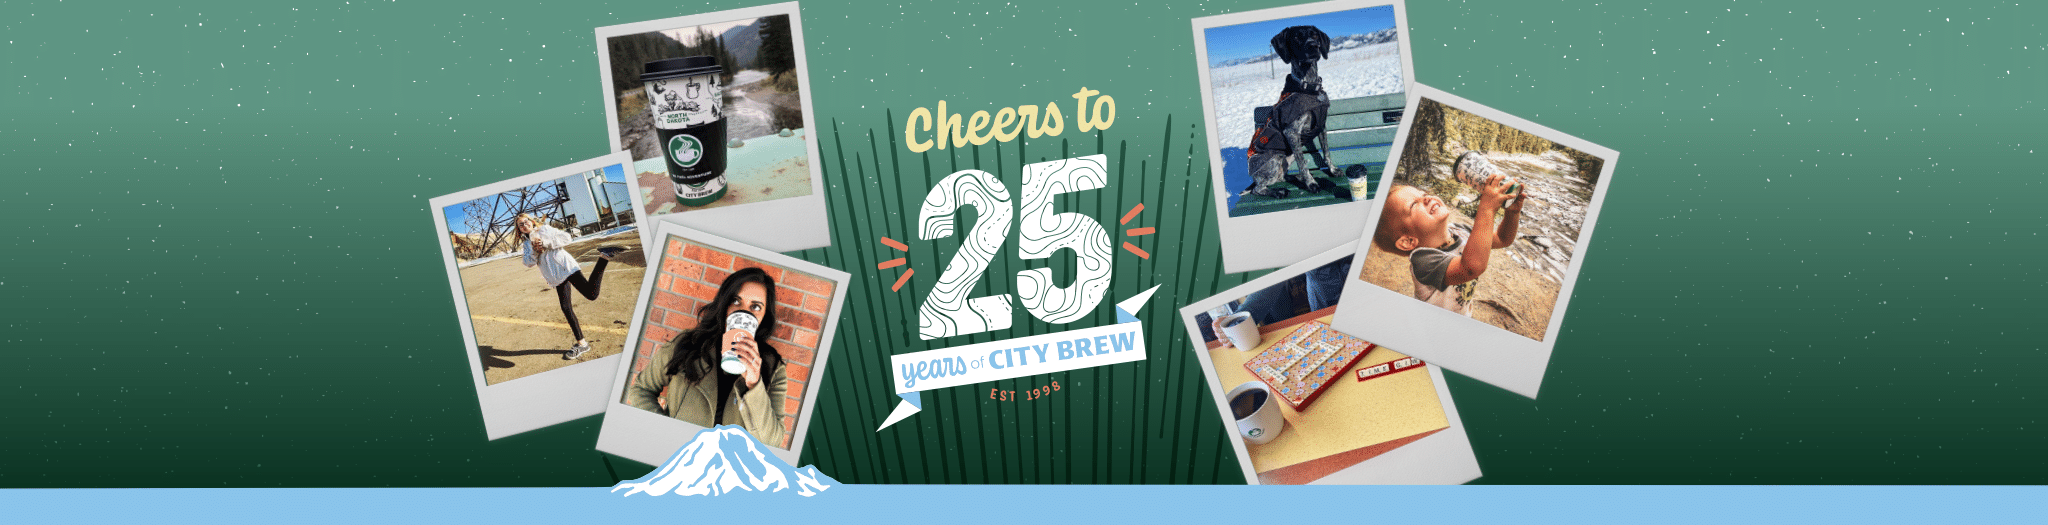 Cheers to 25 years of City Brew!